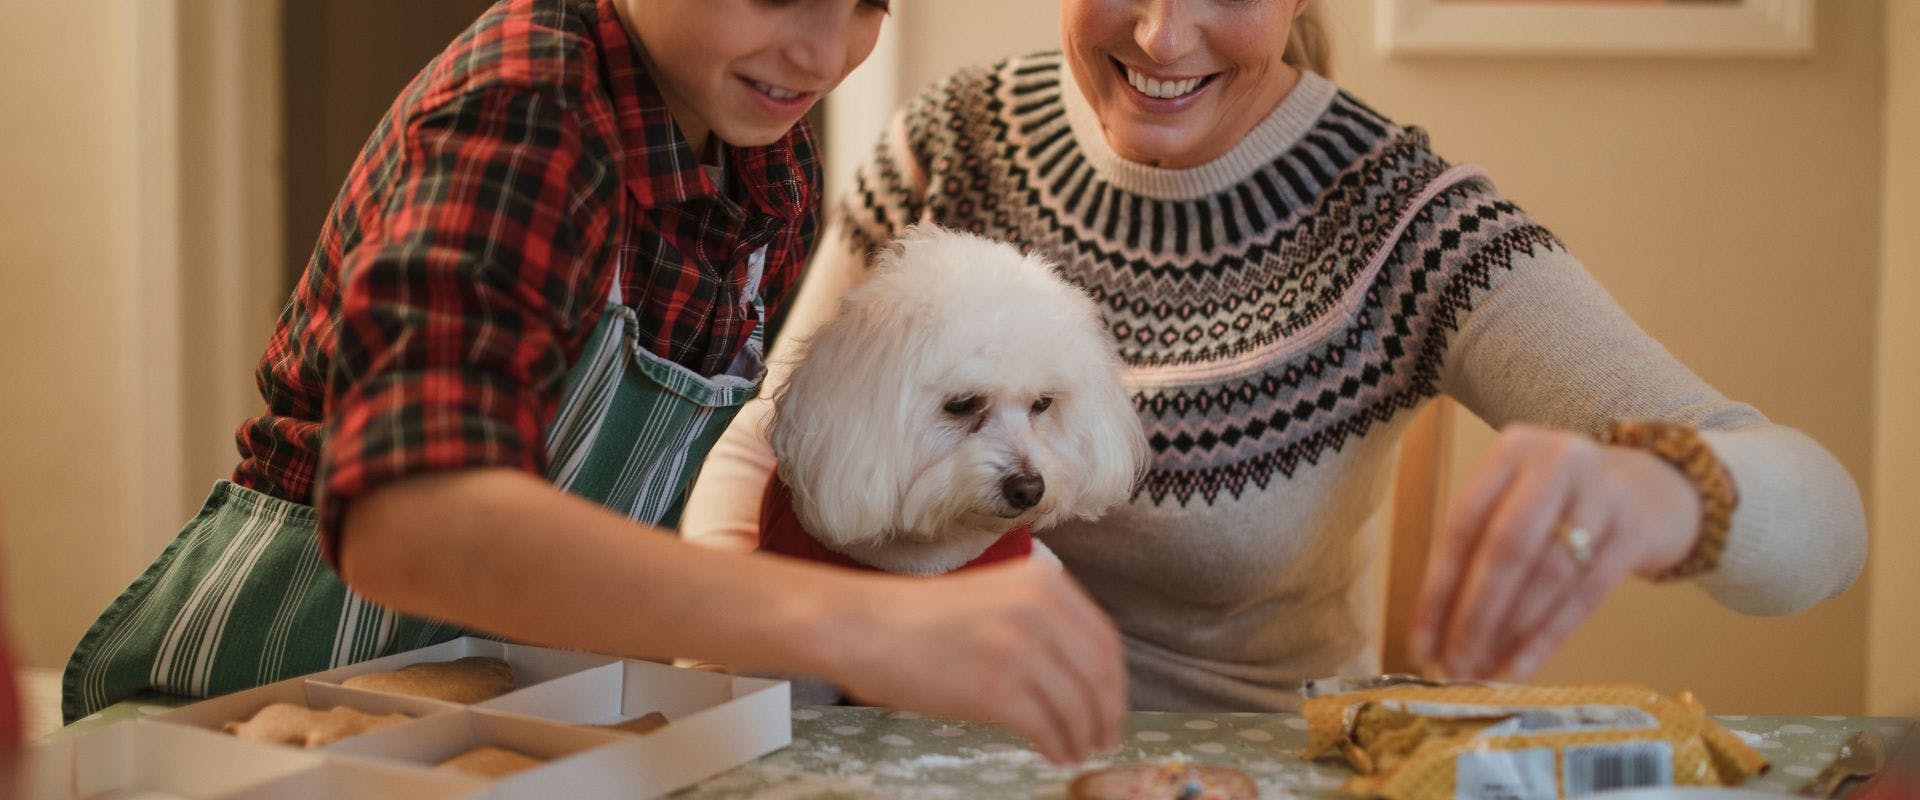 Mother and son baking with fluffy white dog